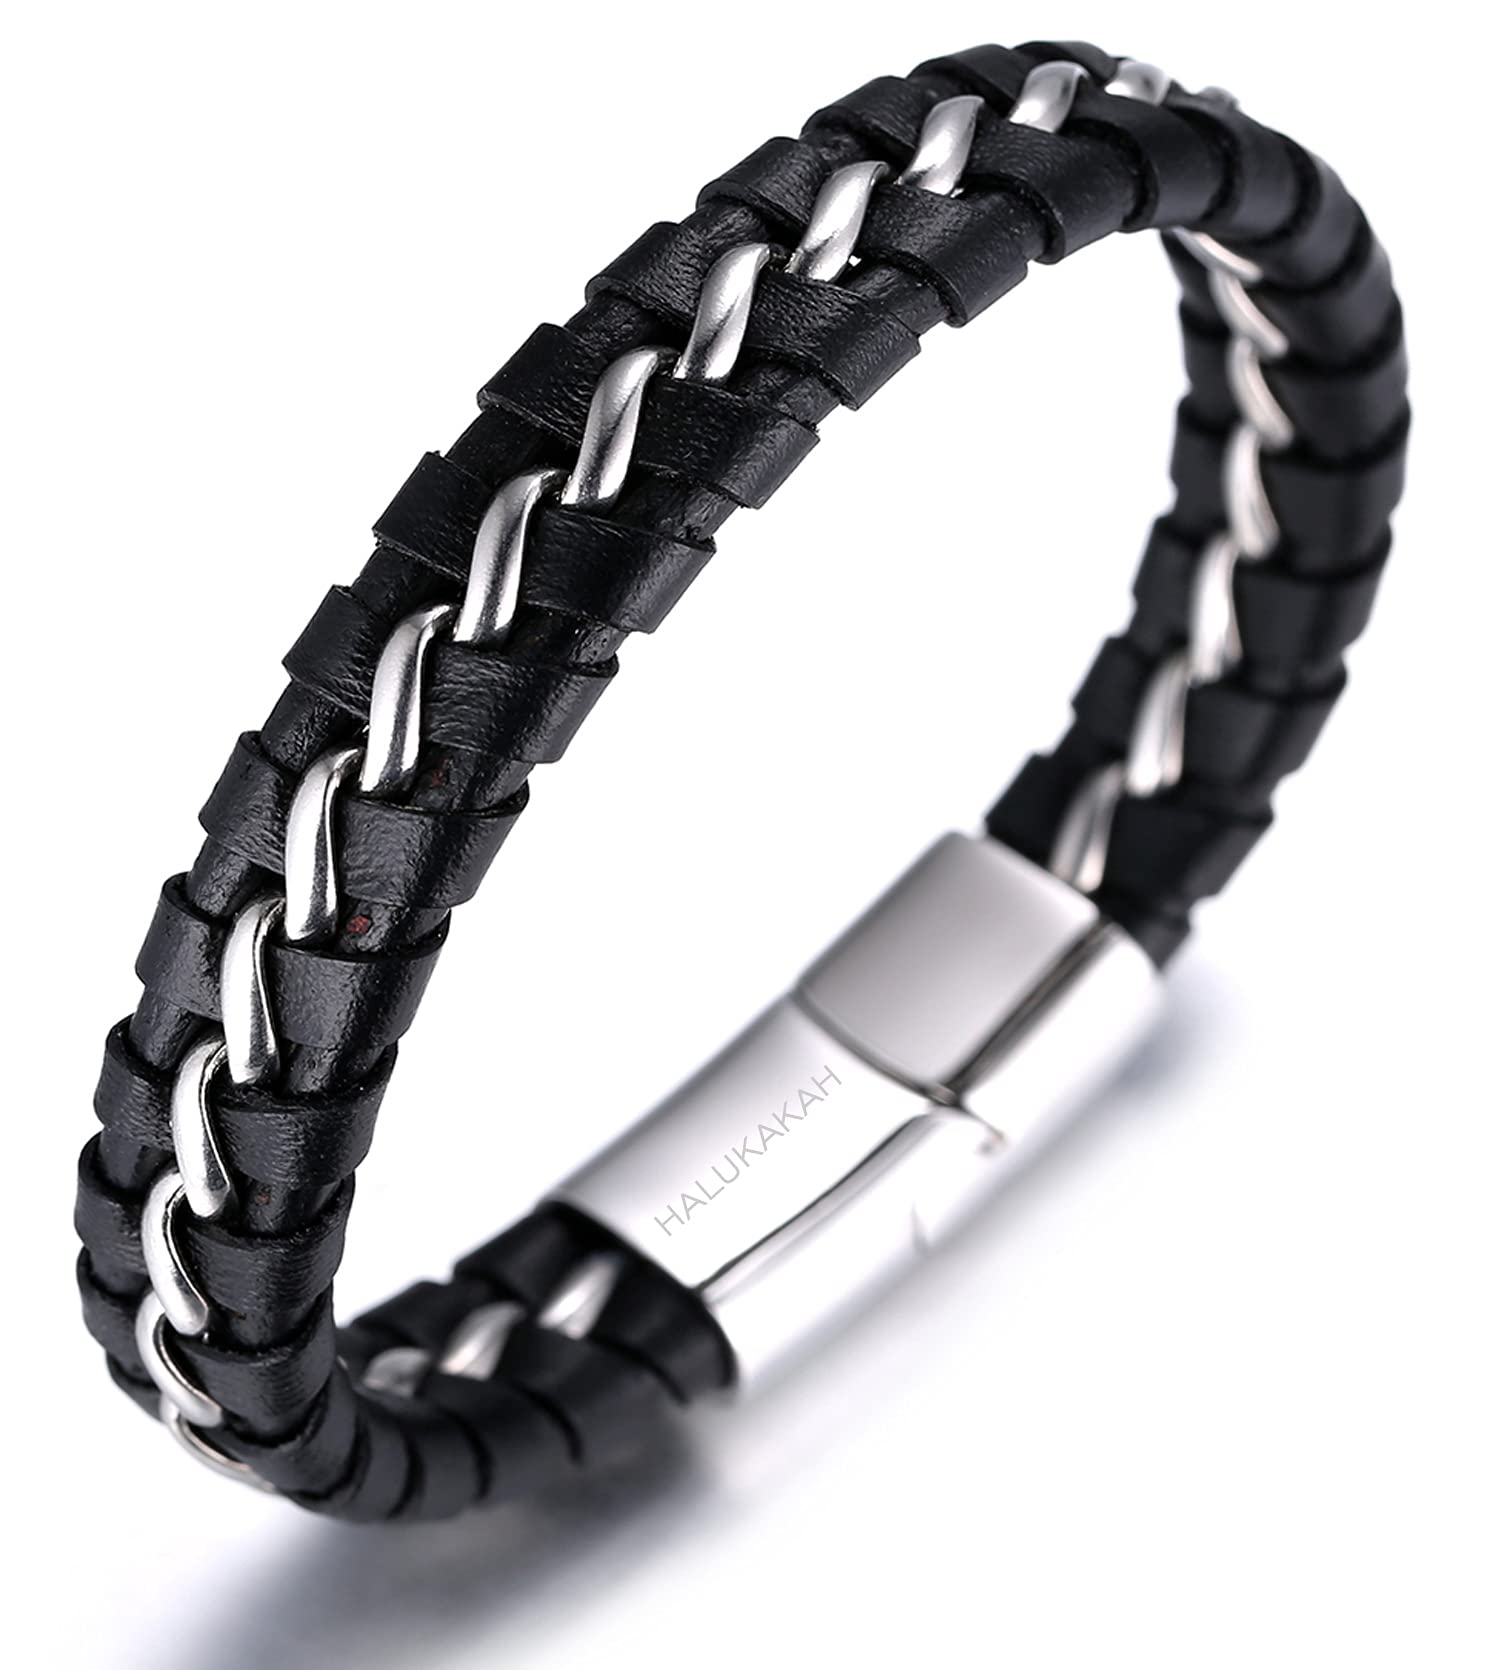 Halukakah Kids ● Solo Junior ● Boy's Genuine Leather Bracelet Black 6-12+3 Y/O. Titanium Golden/Silver Chain Magnetic Clasp Size Adjustable 7"-7.7"(18-19.5cm) with Free Giftbox